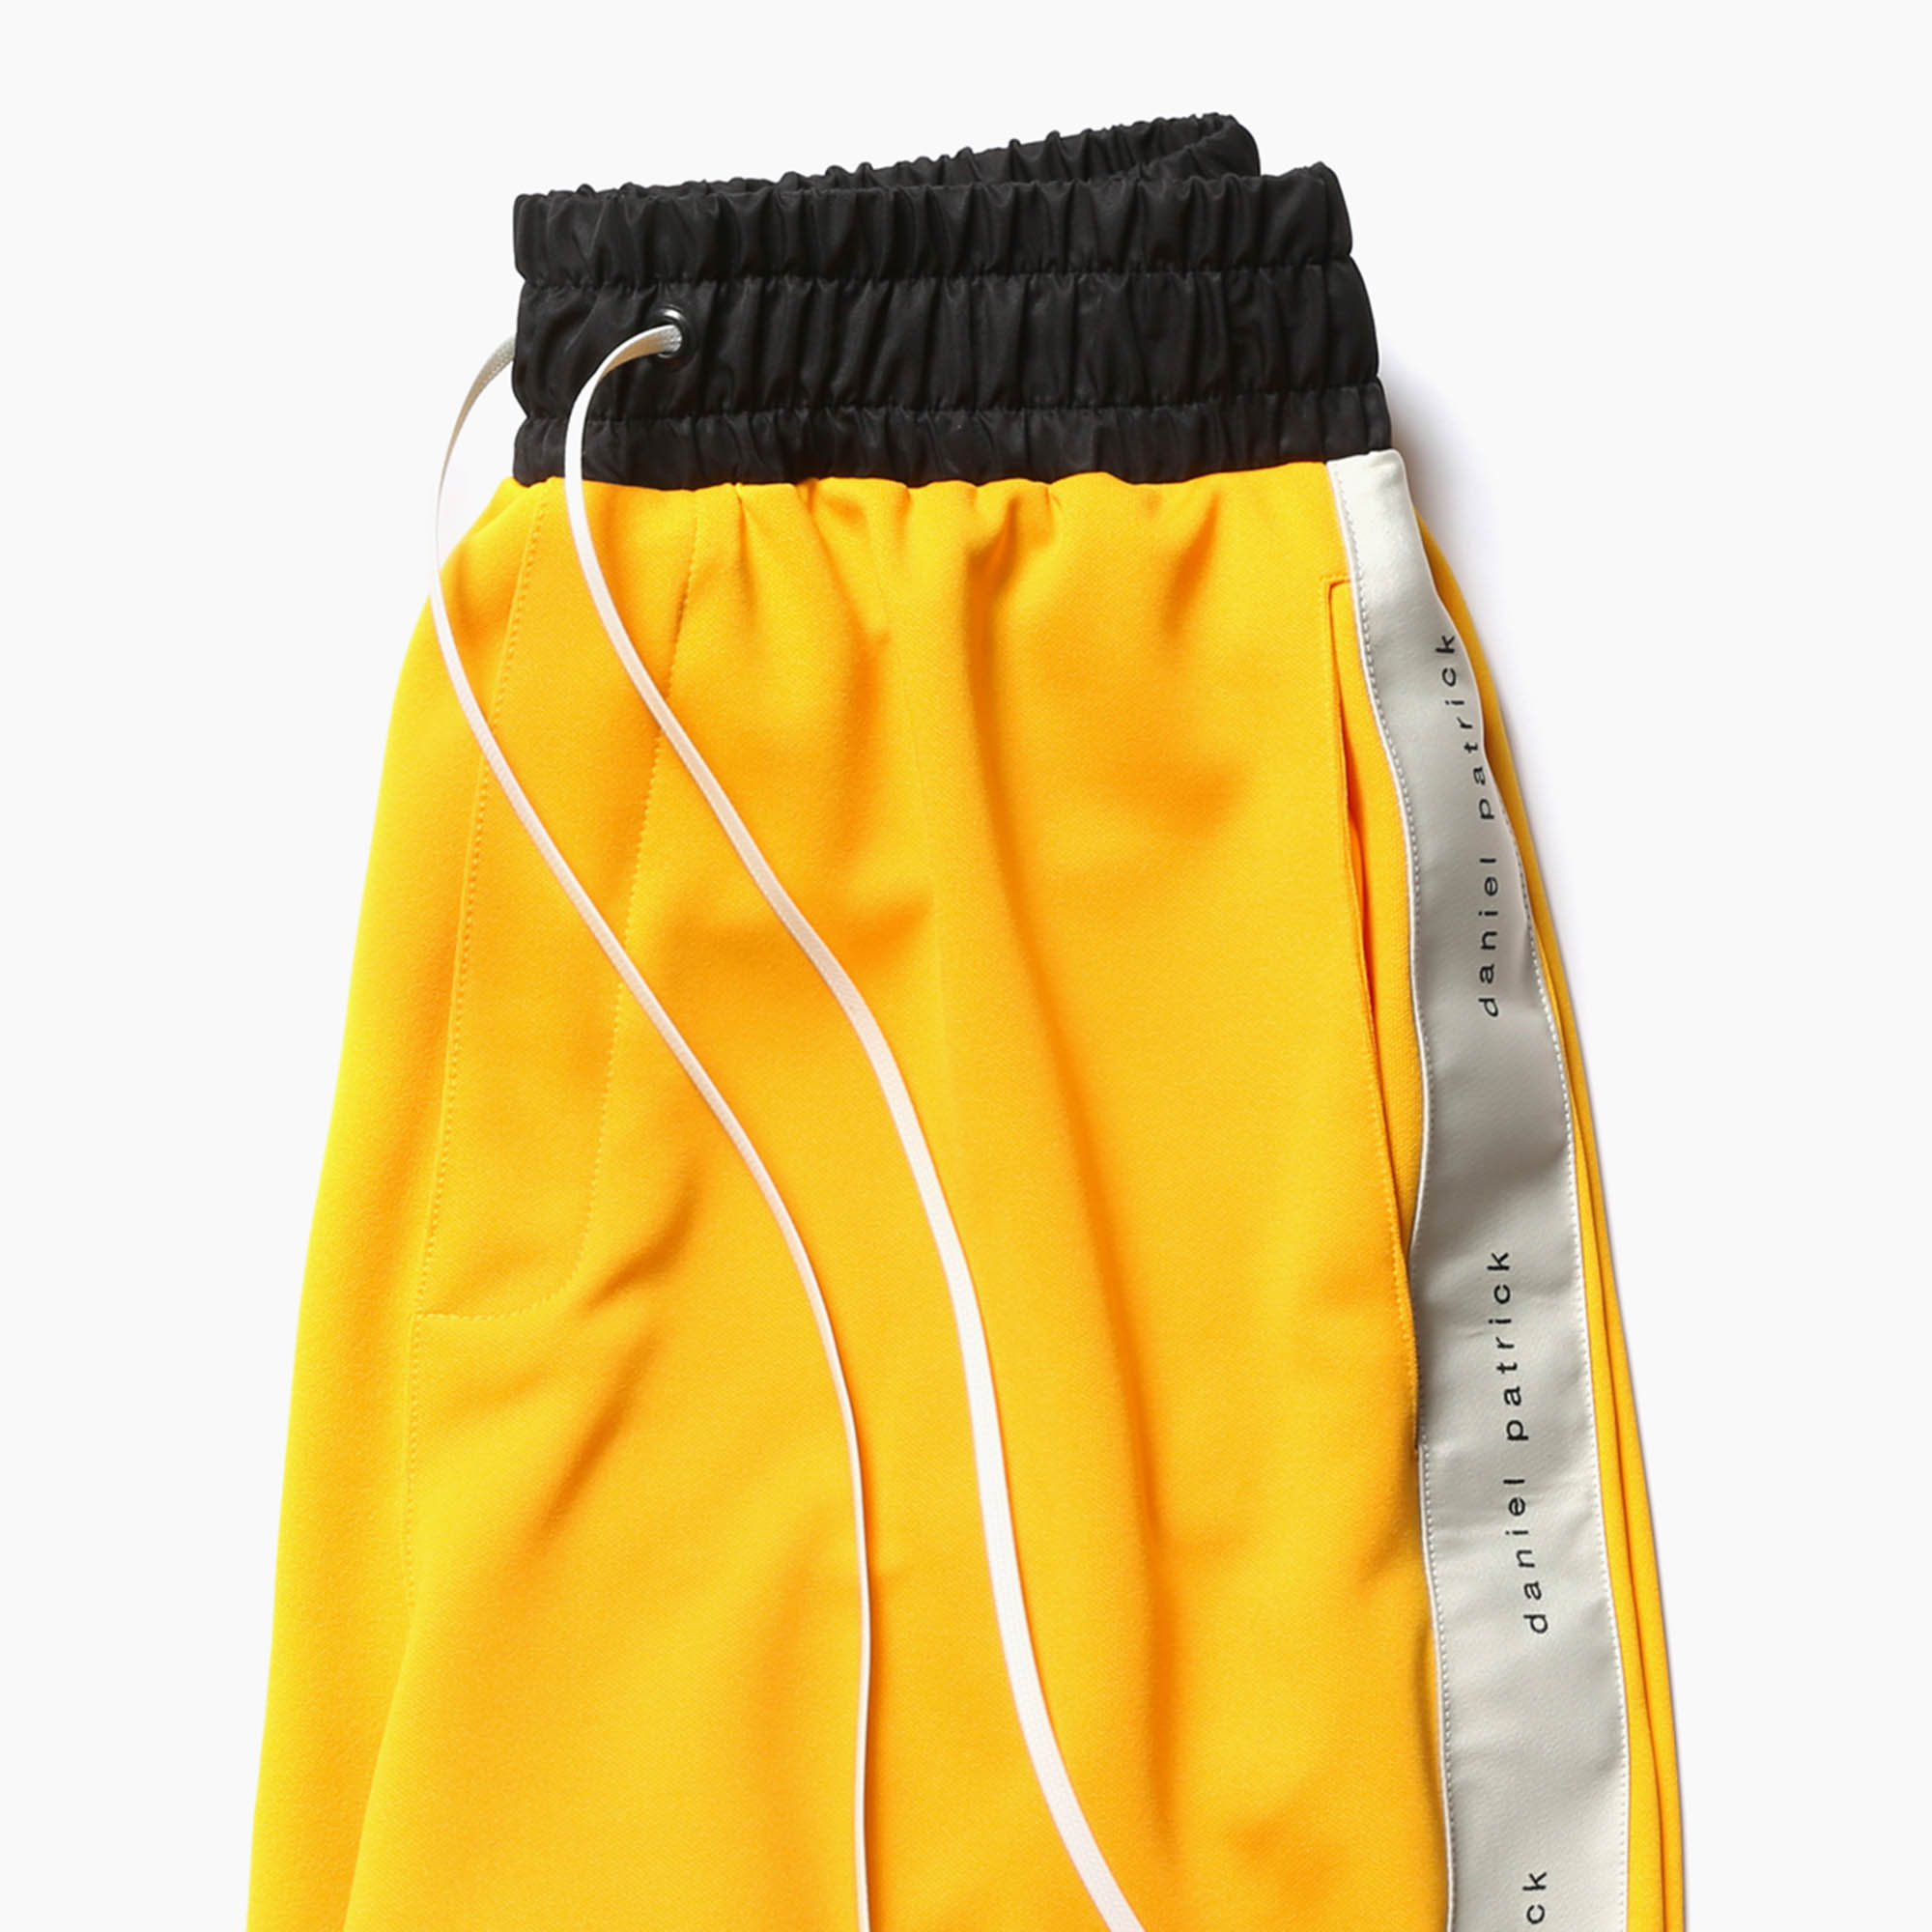 Classic Gym Short in Yellow/Ivory